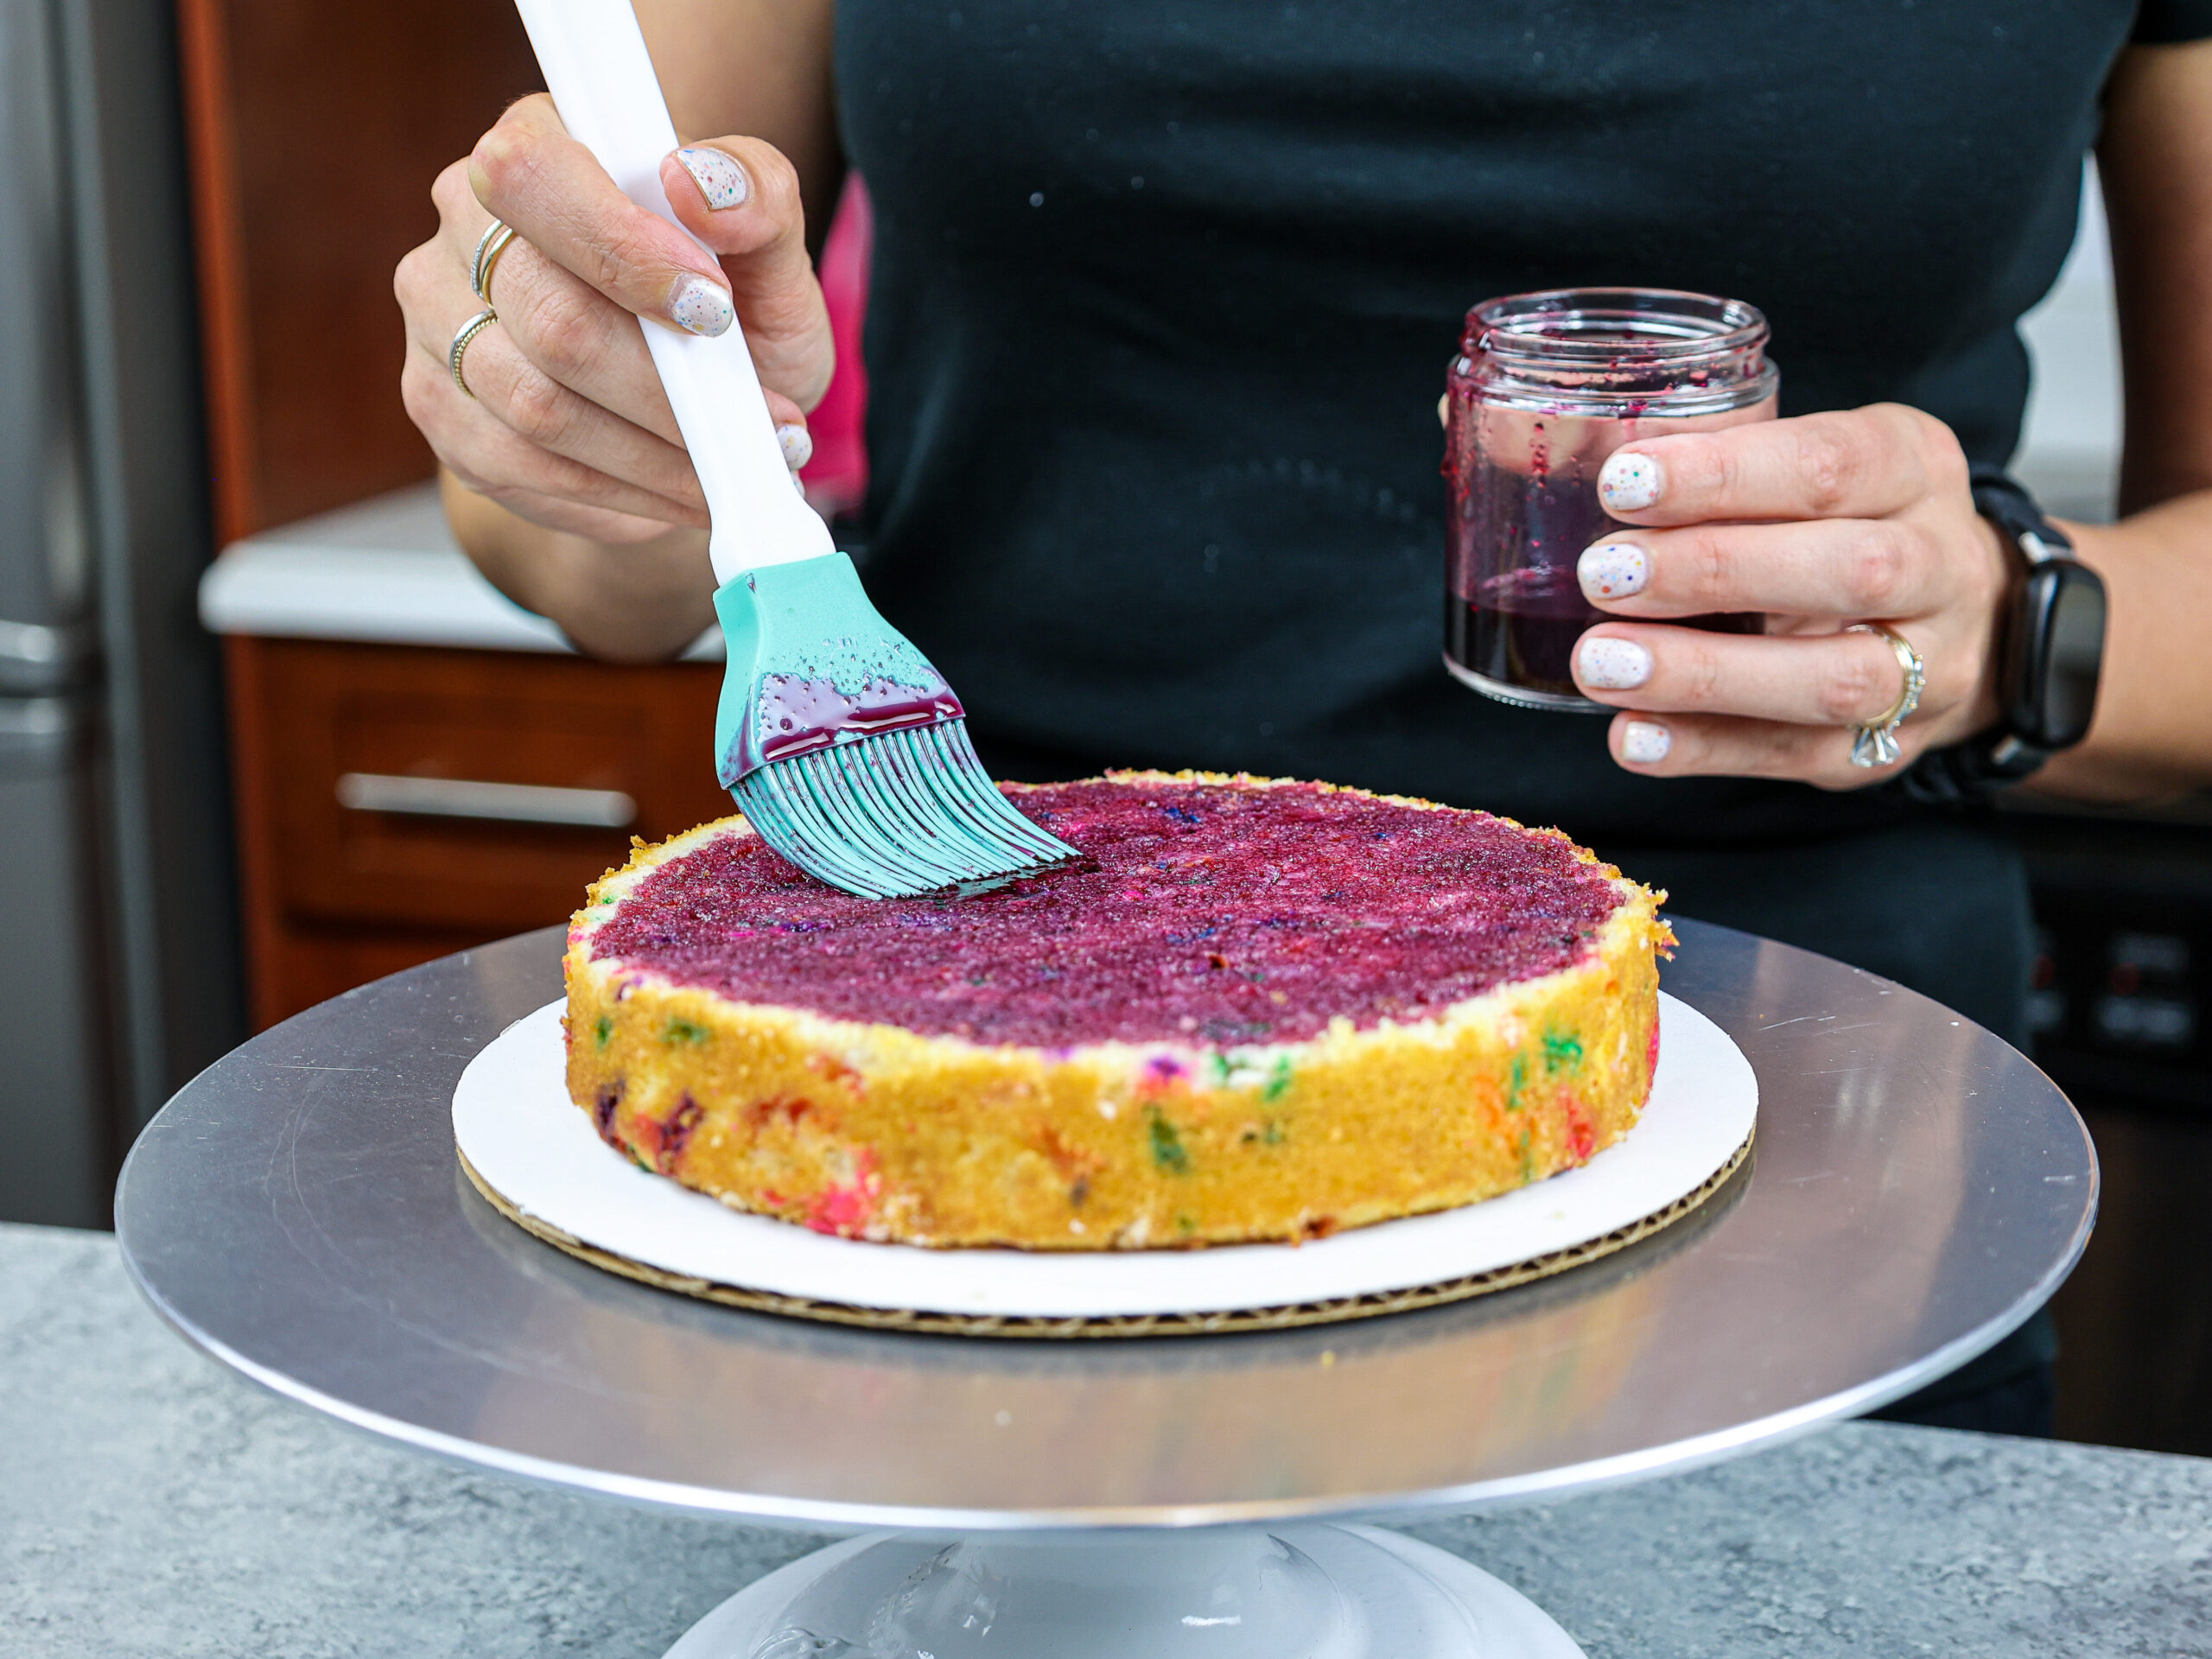 image of blueberry simple syrup being brushed onto a cake layer